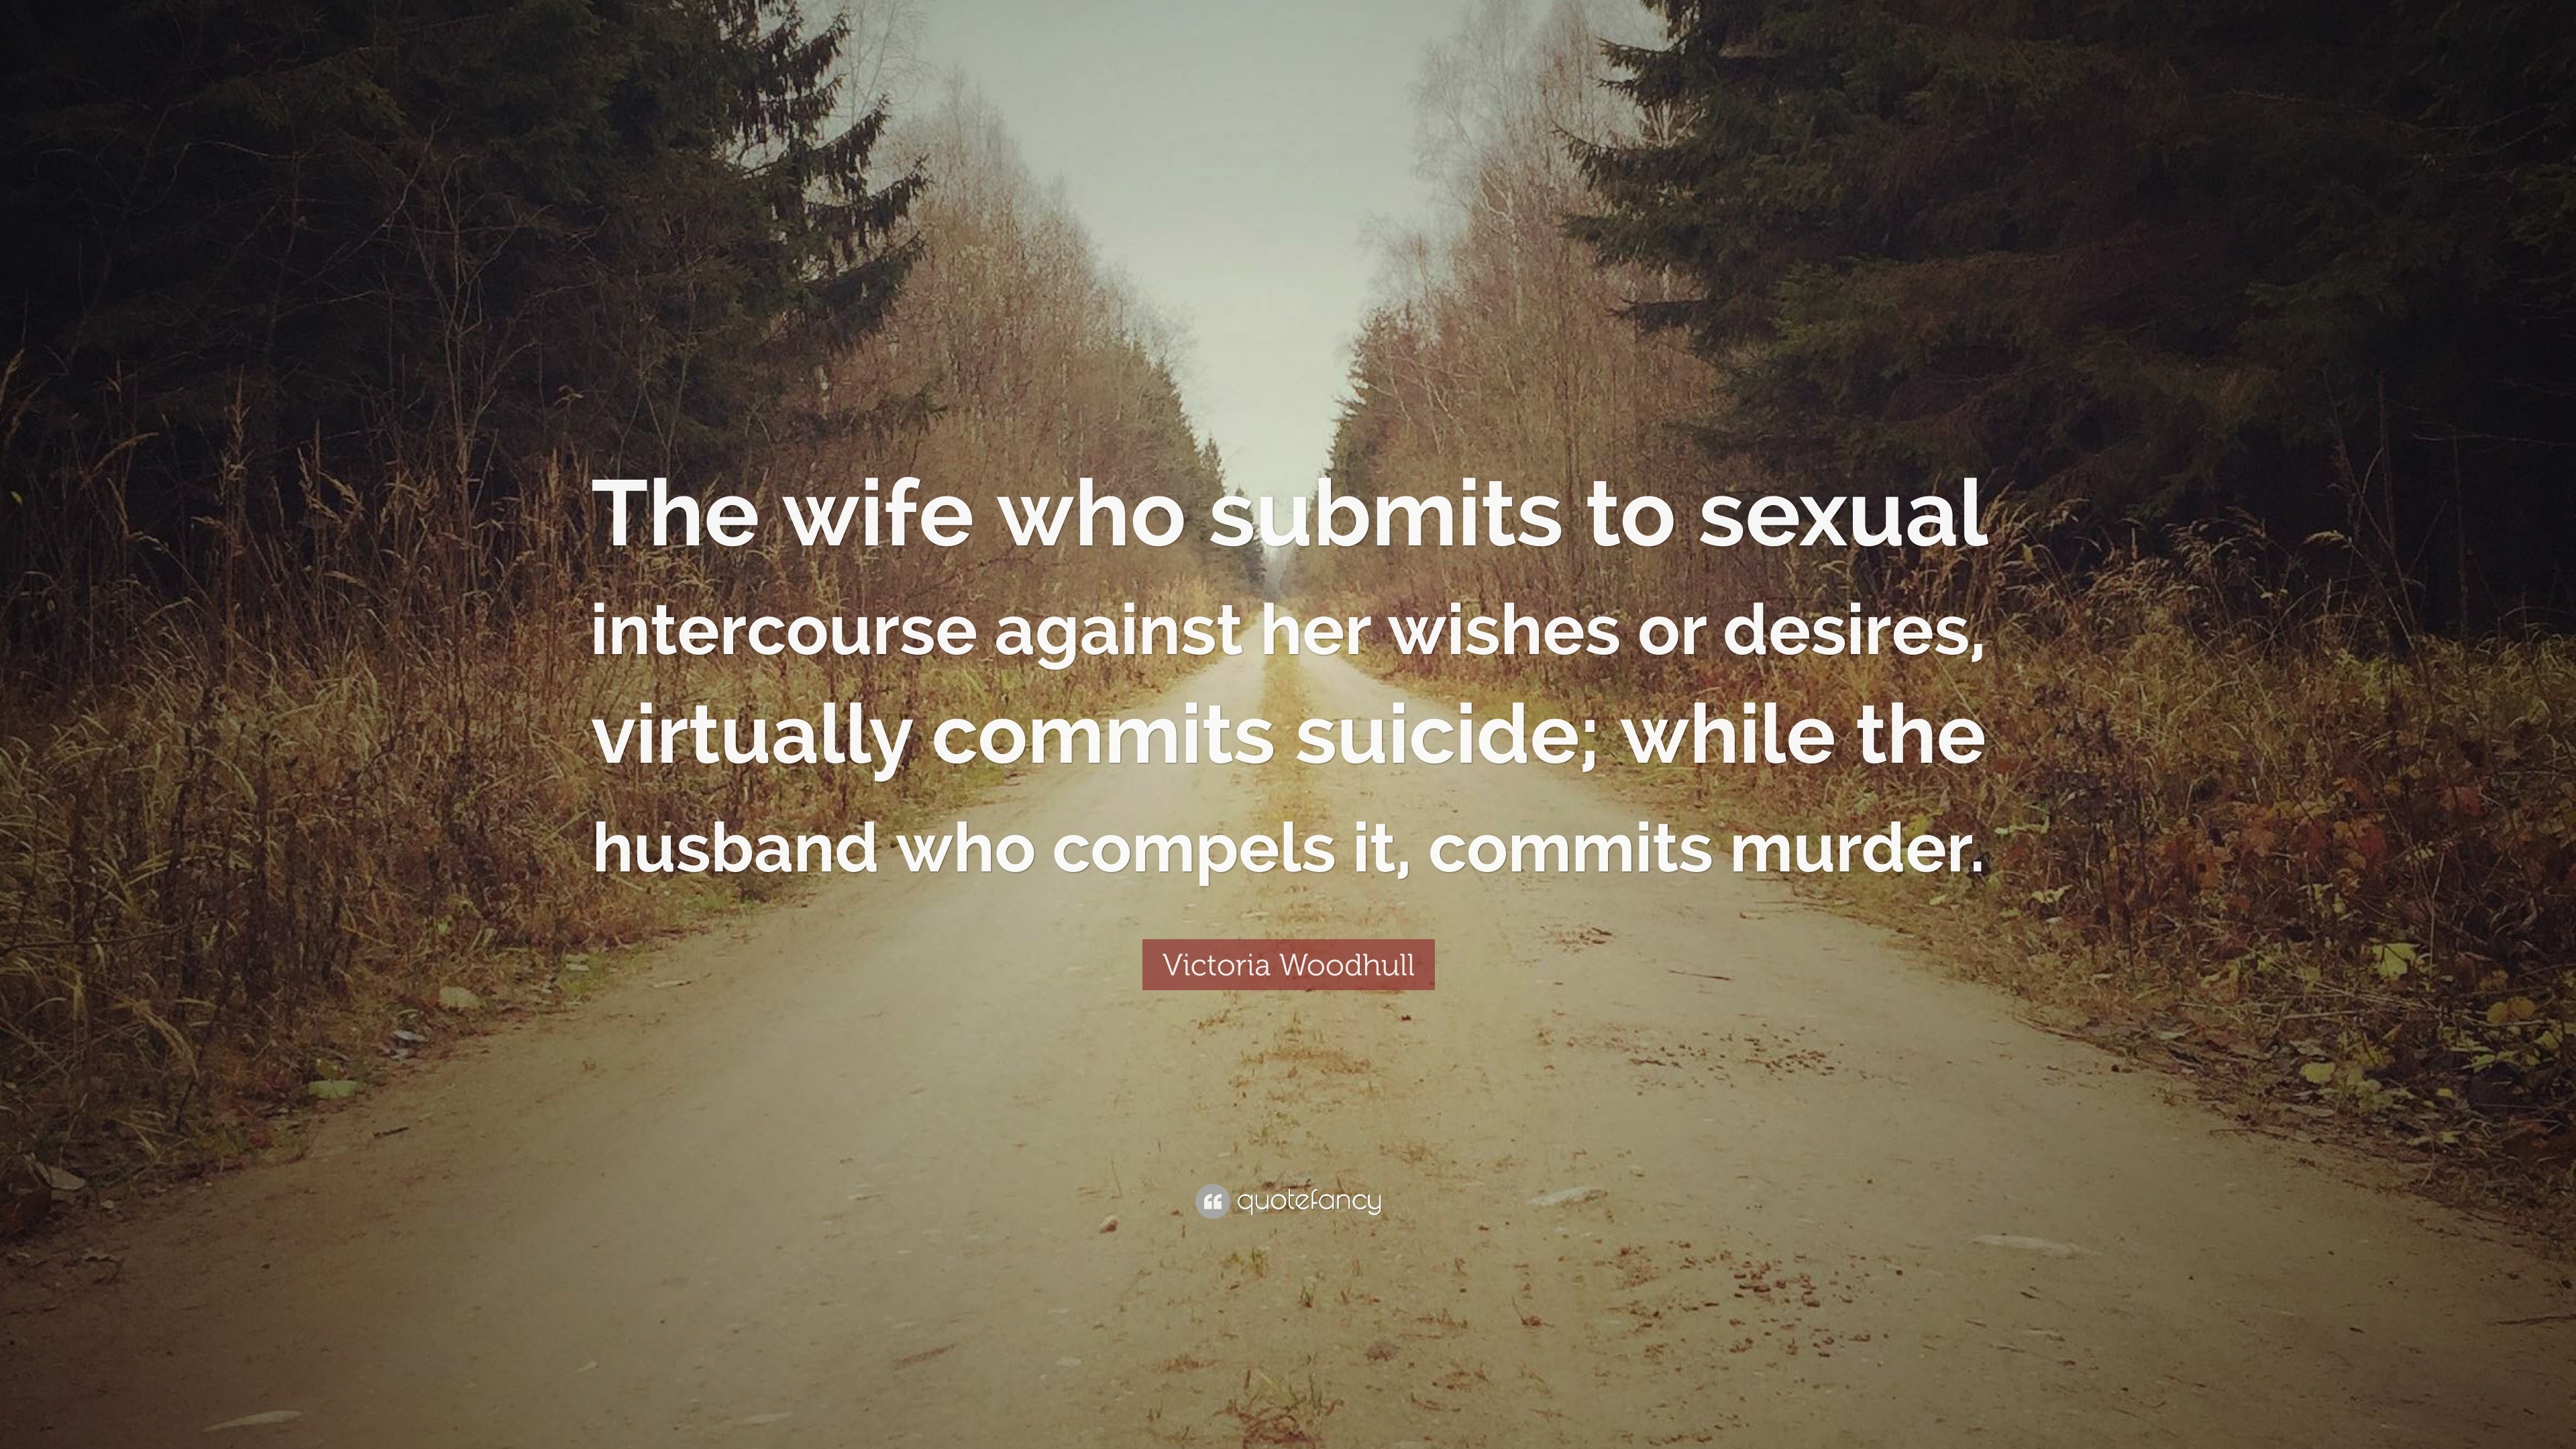 Victoria Woodhull Quote “The wife who submits to sexual intercourse against her wishes or desires, virtually commits suicide; while the husband w...” photo